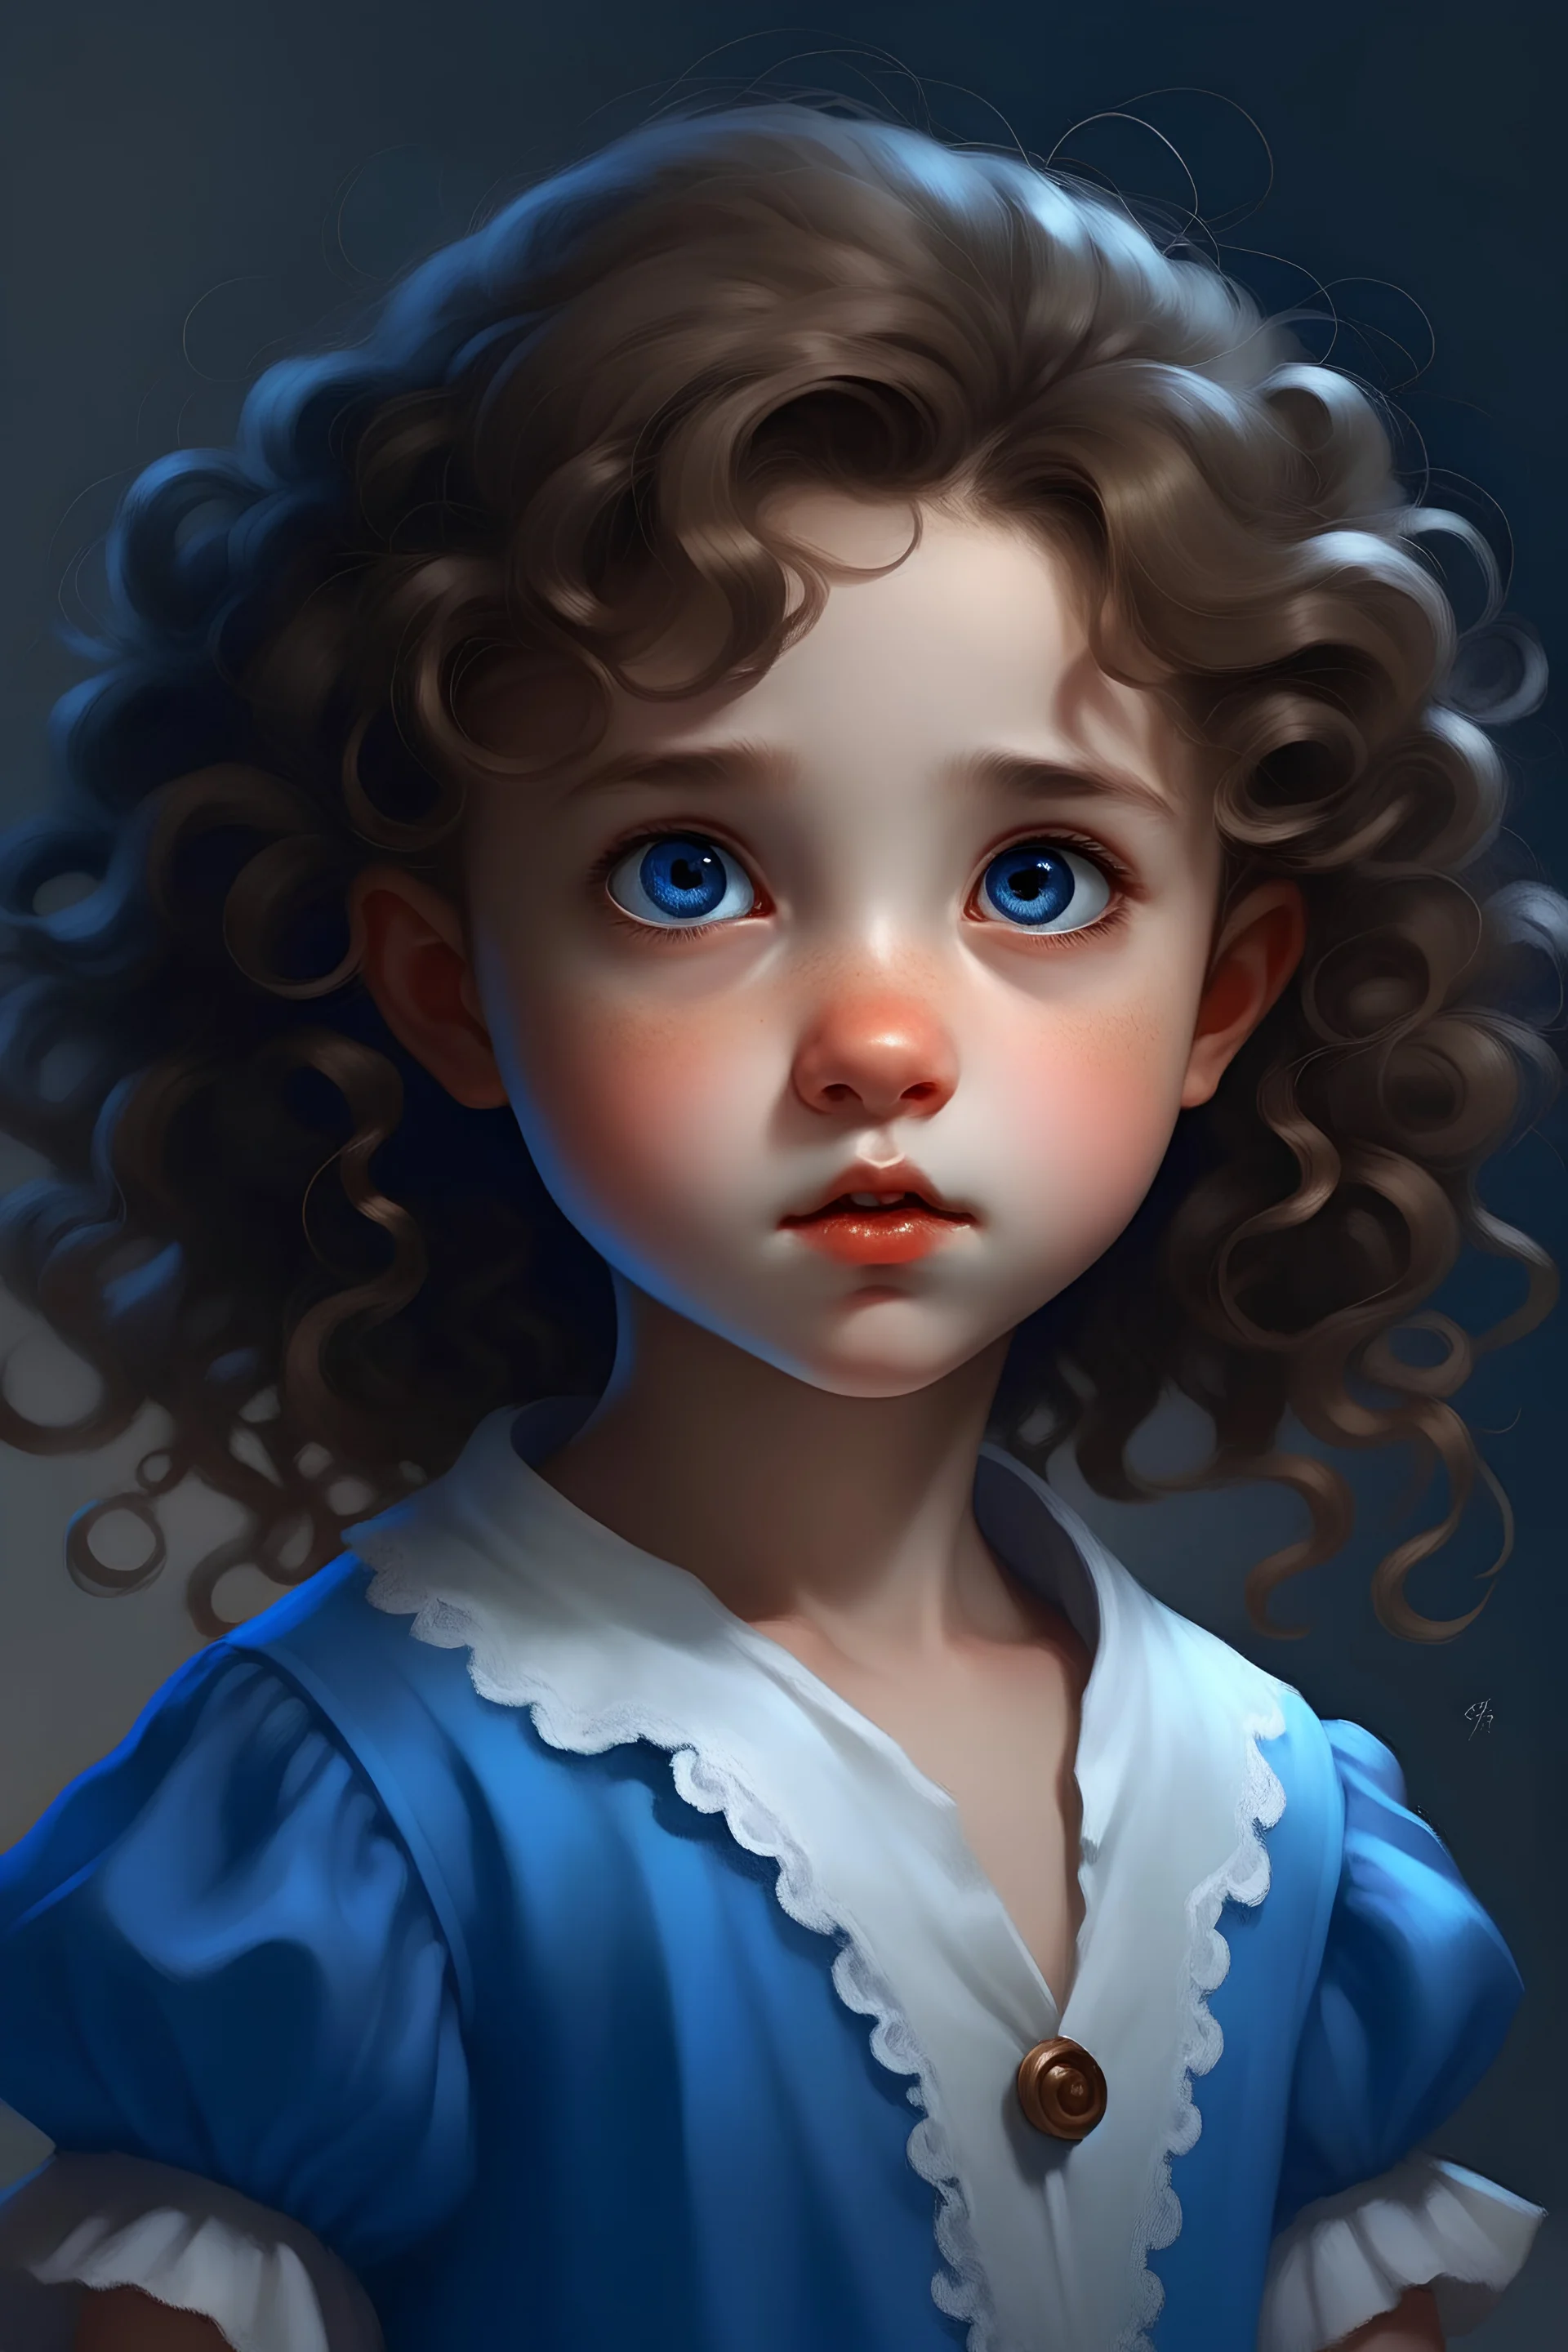 girl with curly brown hair. She is small and has big, bright eyes, which often express her curiosity and innocence. Her outfit is generally simple, consisting of a blue and white dress, with a white blouse underneath and silver shoes crying